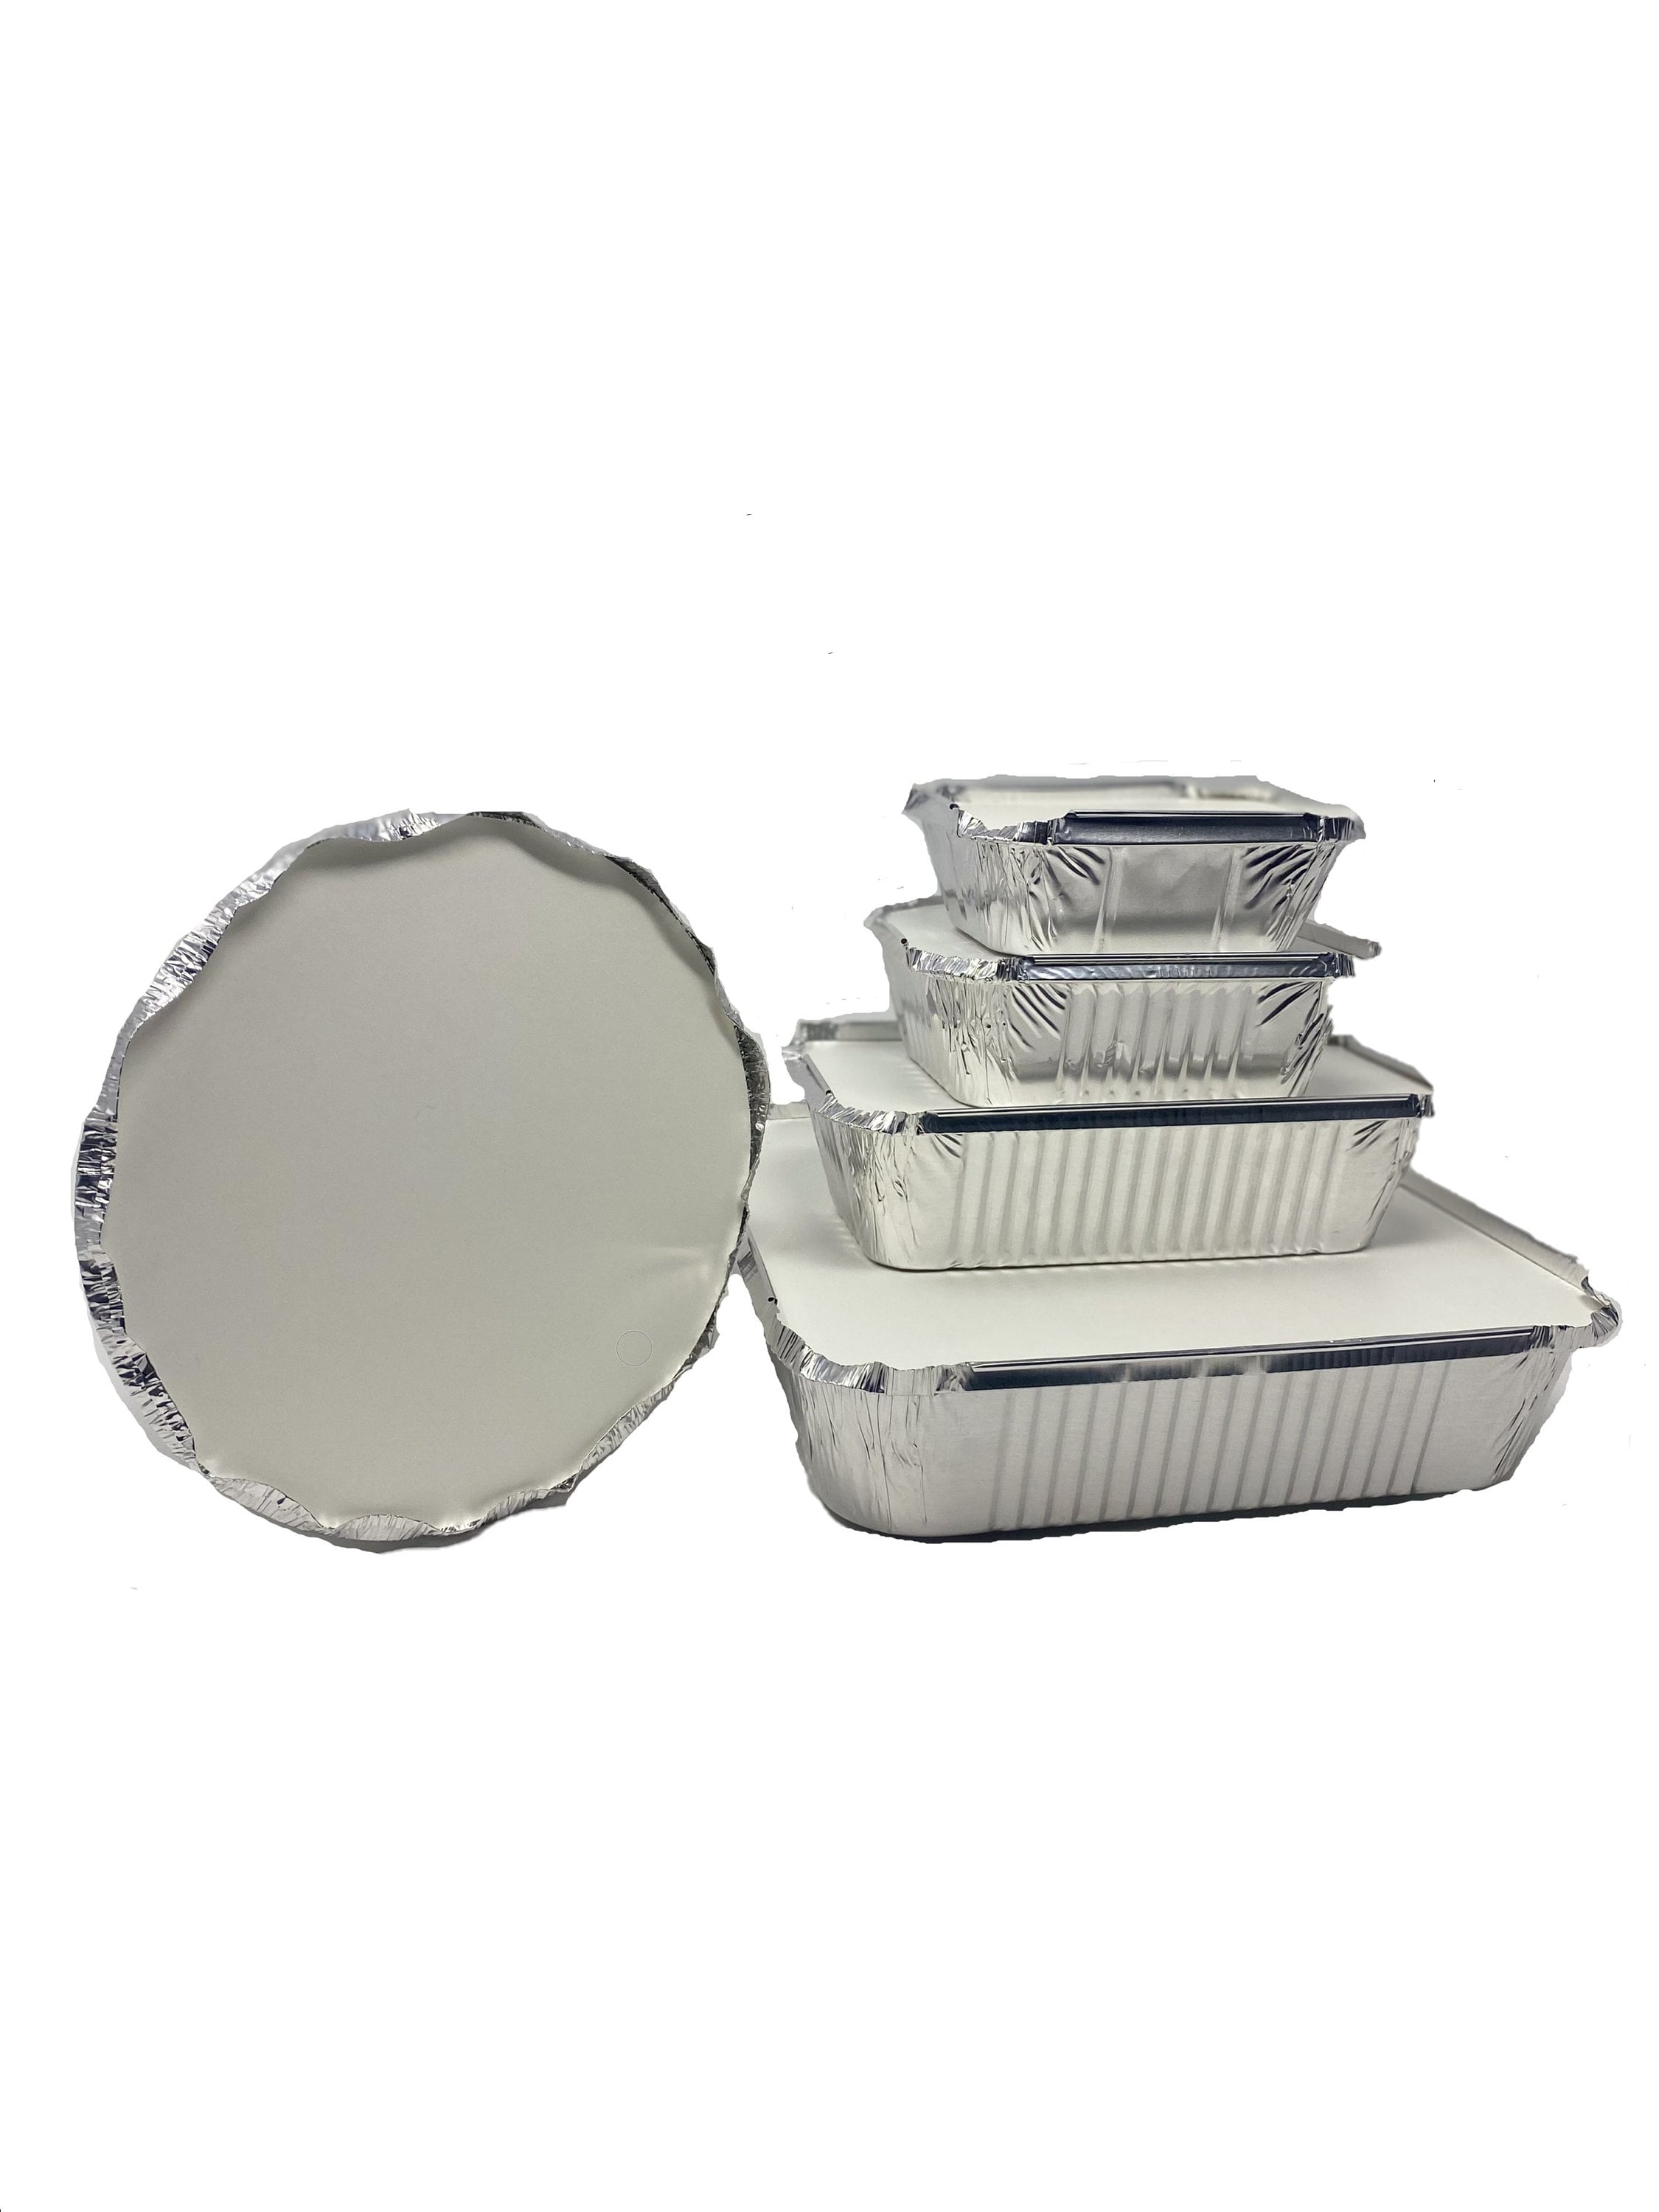 Aluminium Foil Food Containers With Lids Takeaway Home Catering